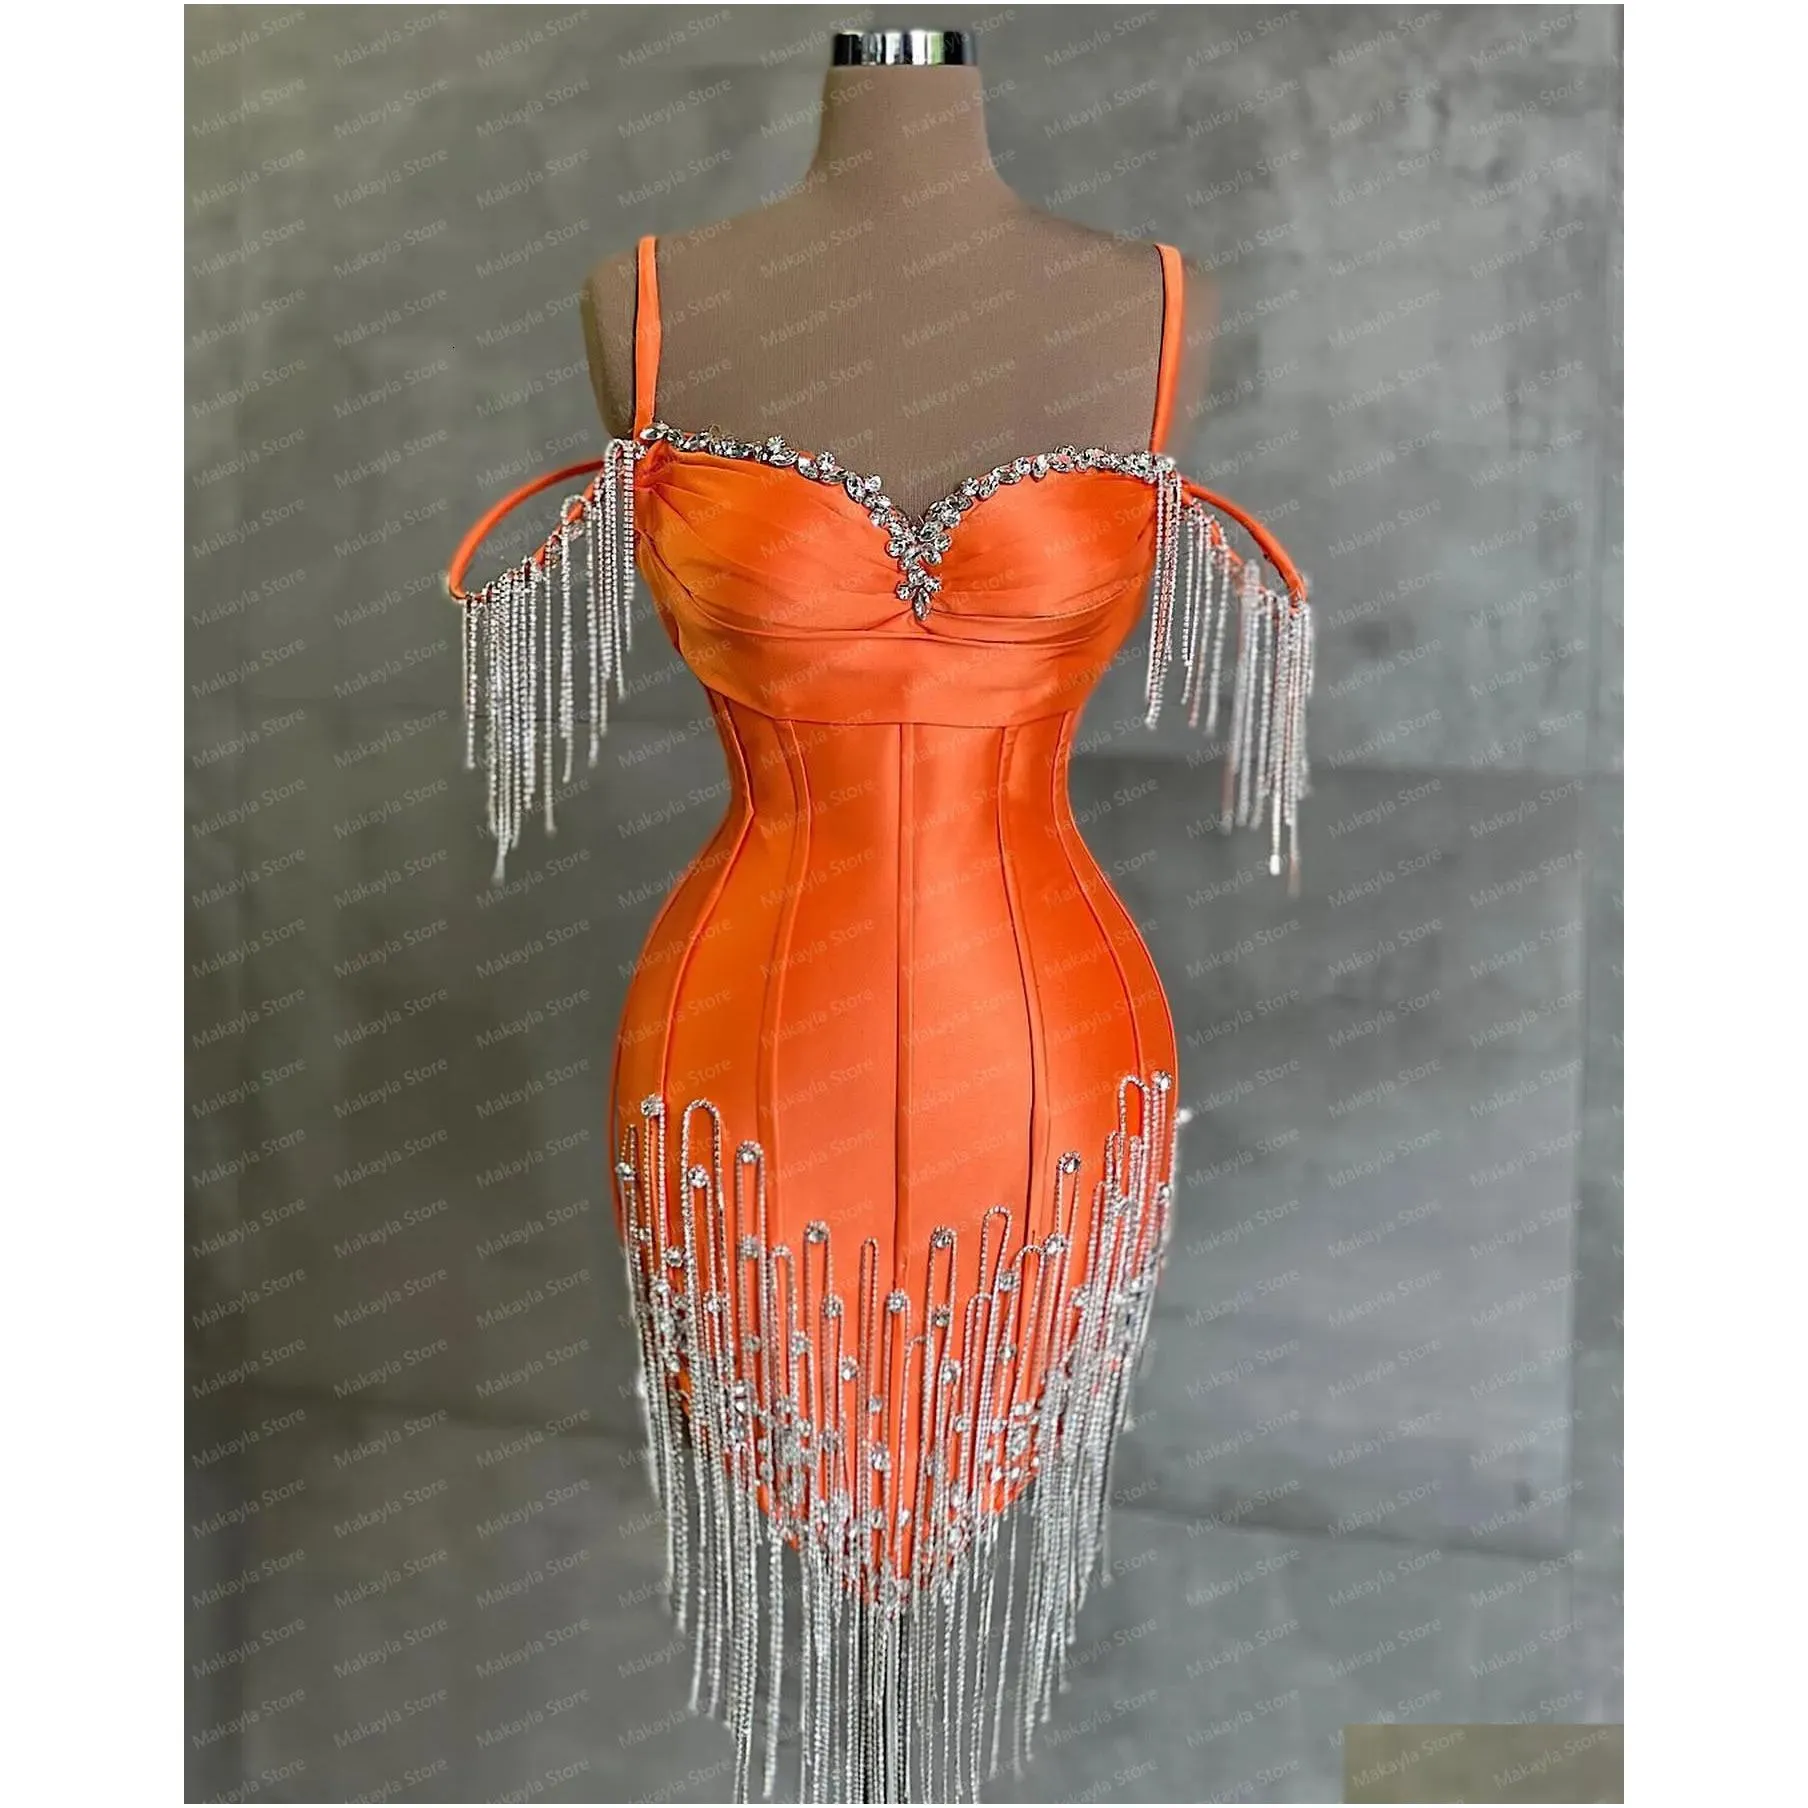 Urban Sexy Dresses Party Arrival Orange Short Prom Crystals Tassel Sweetheart Women Cocktail Evening Gowns Custom Made 230310 Drop De Dhnis